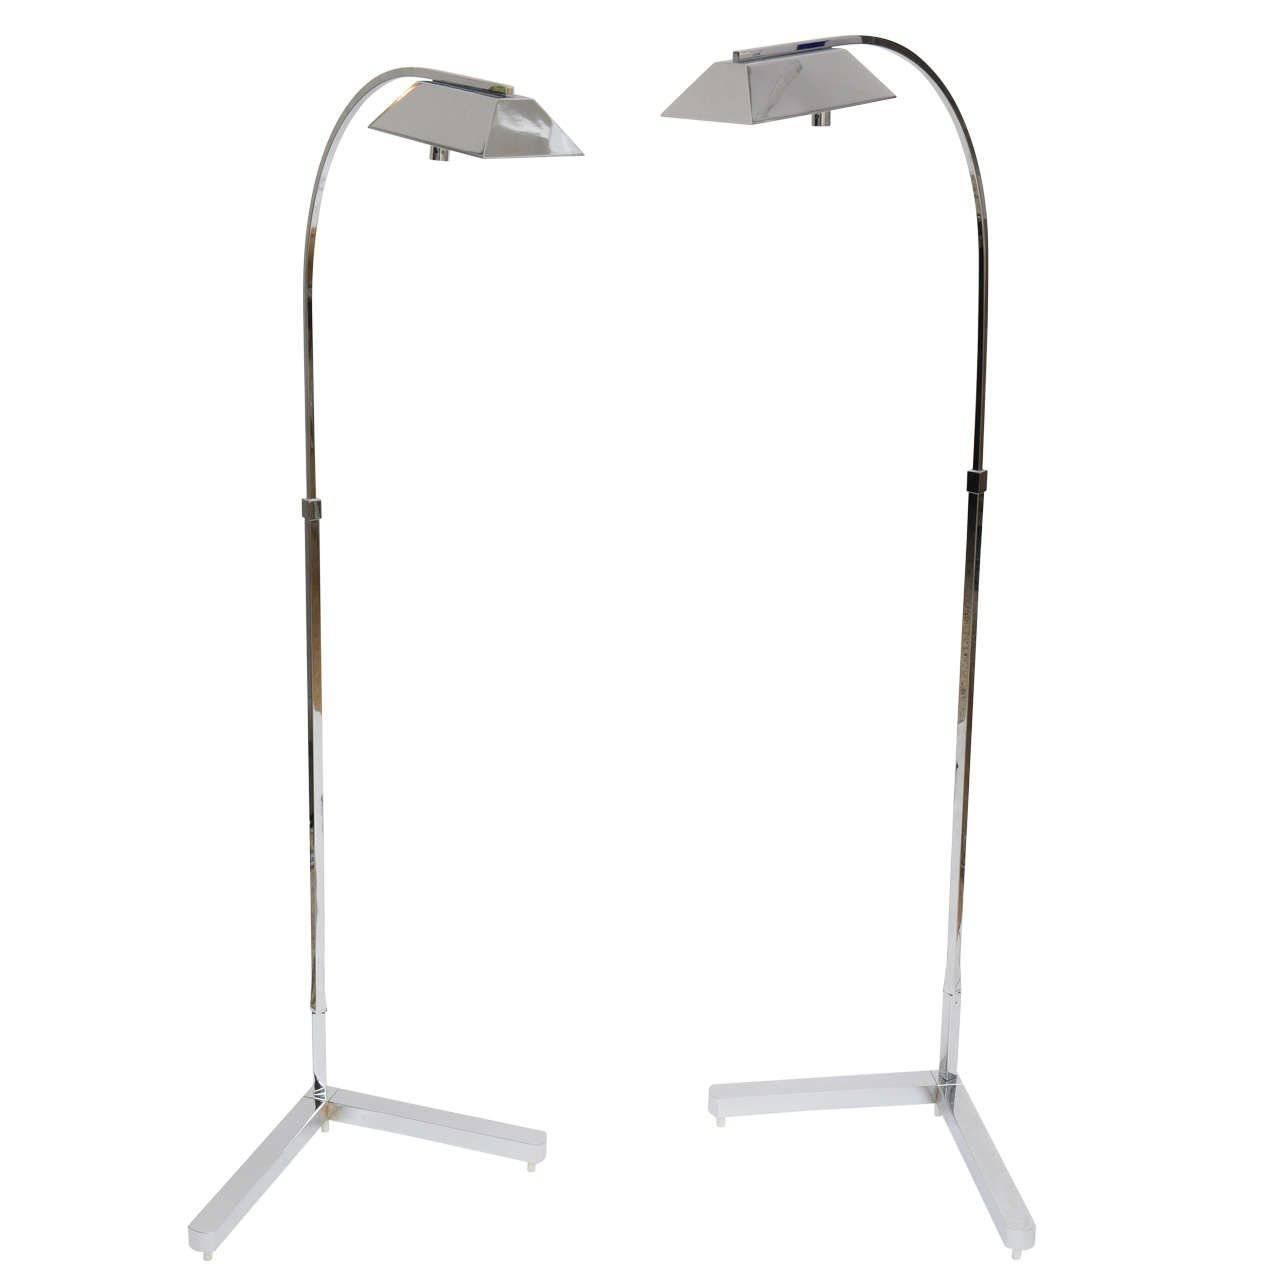 Pair of Casella Adjustable Floor Lamps in Polished Chrome